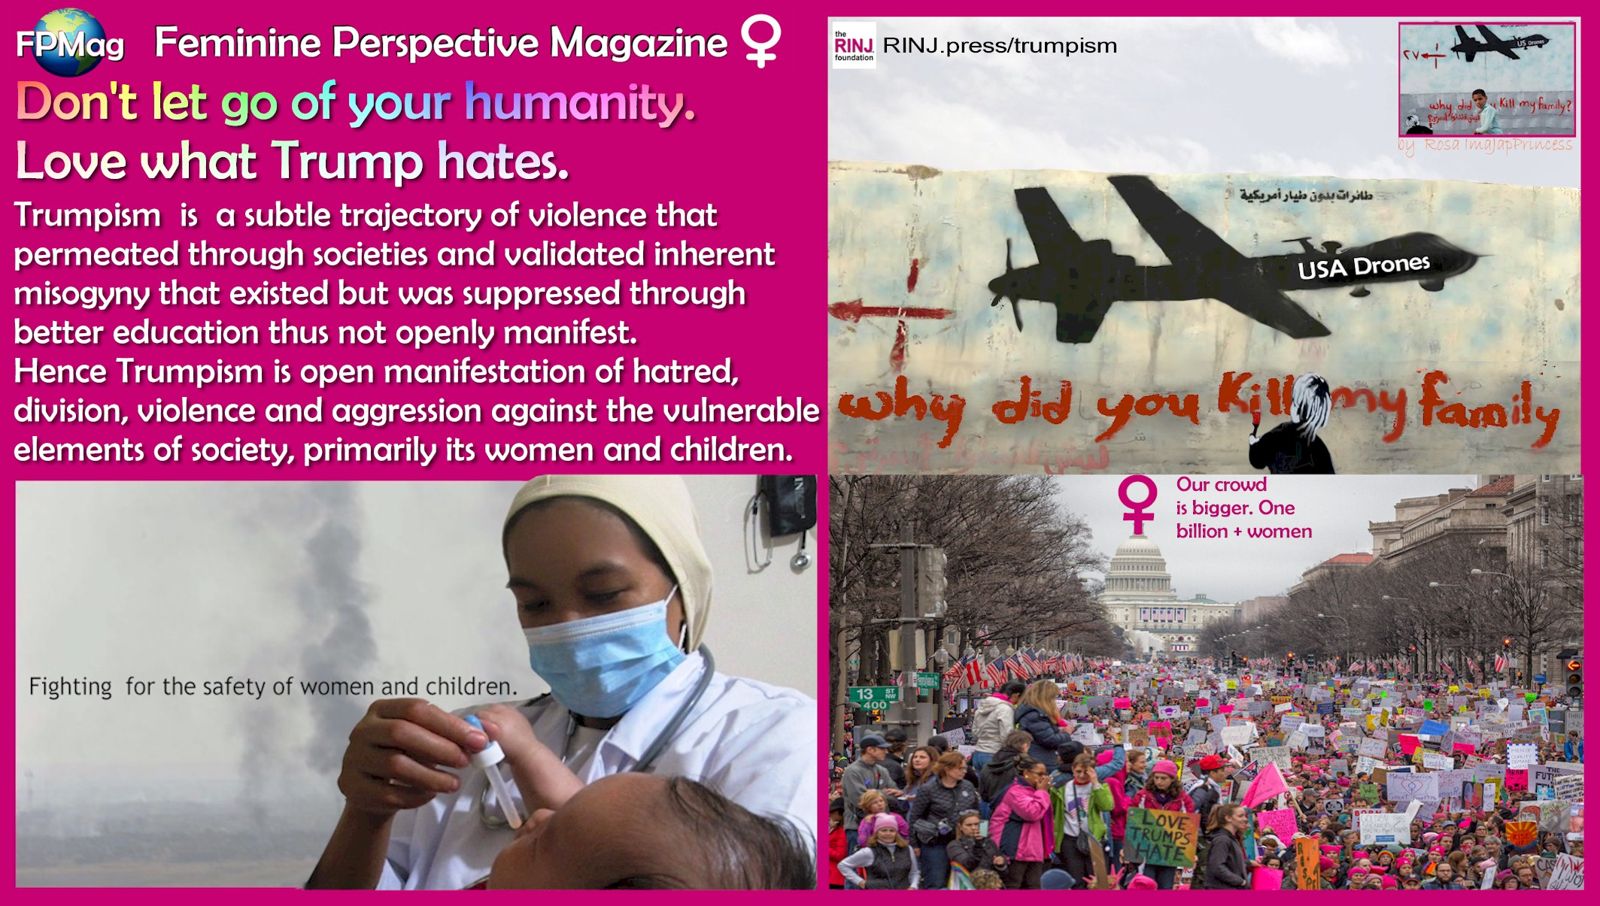 Trumpism is a subtle trajectory of meta-violence that permeated for fivve years through societies and validated inherent misogyny that existed but was suppressed through better education thus not openly manifest. Hence Trumpism is open manifestation of hatred, division, violence and aggression against the vulnerable elements of society, primarily its women and children.